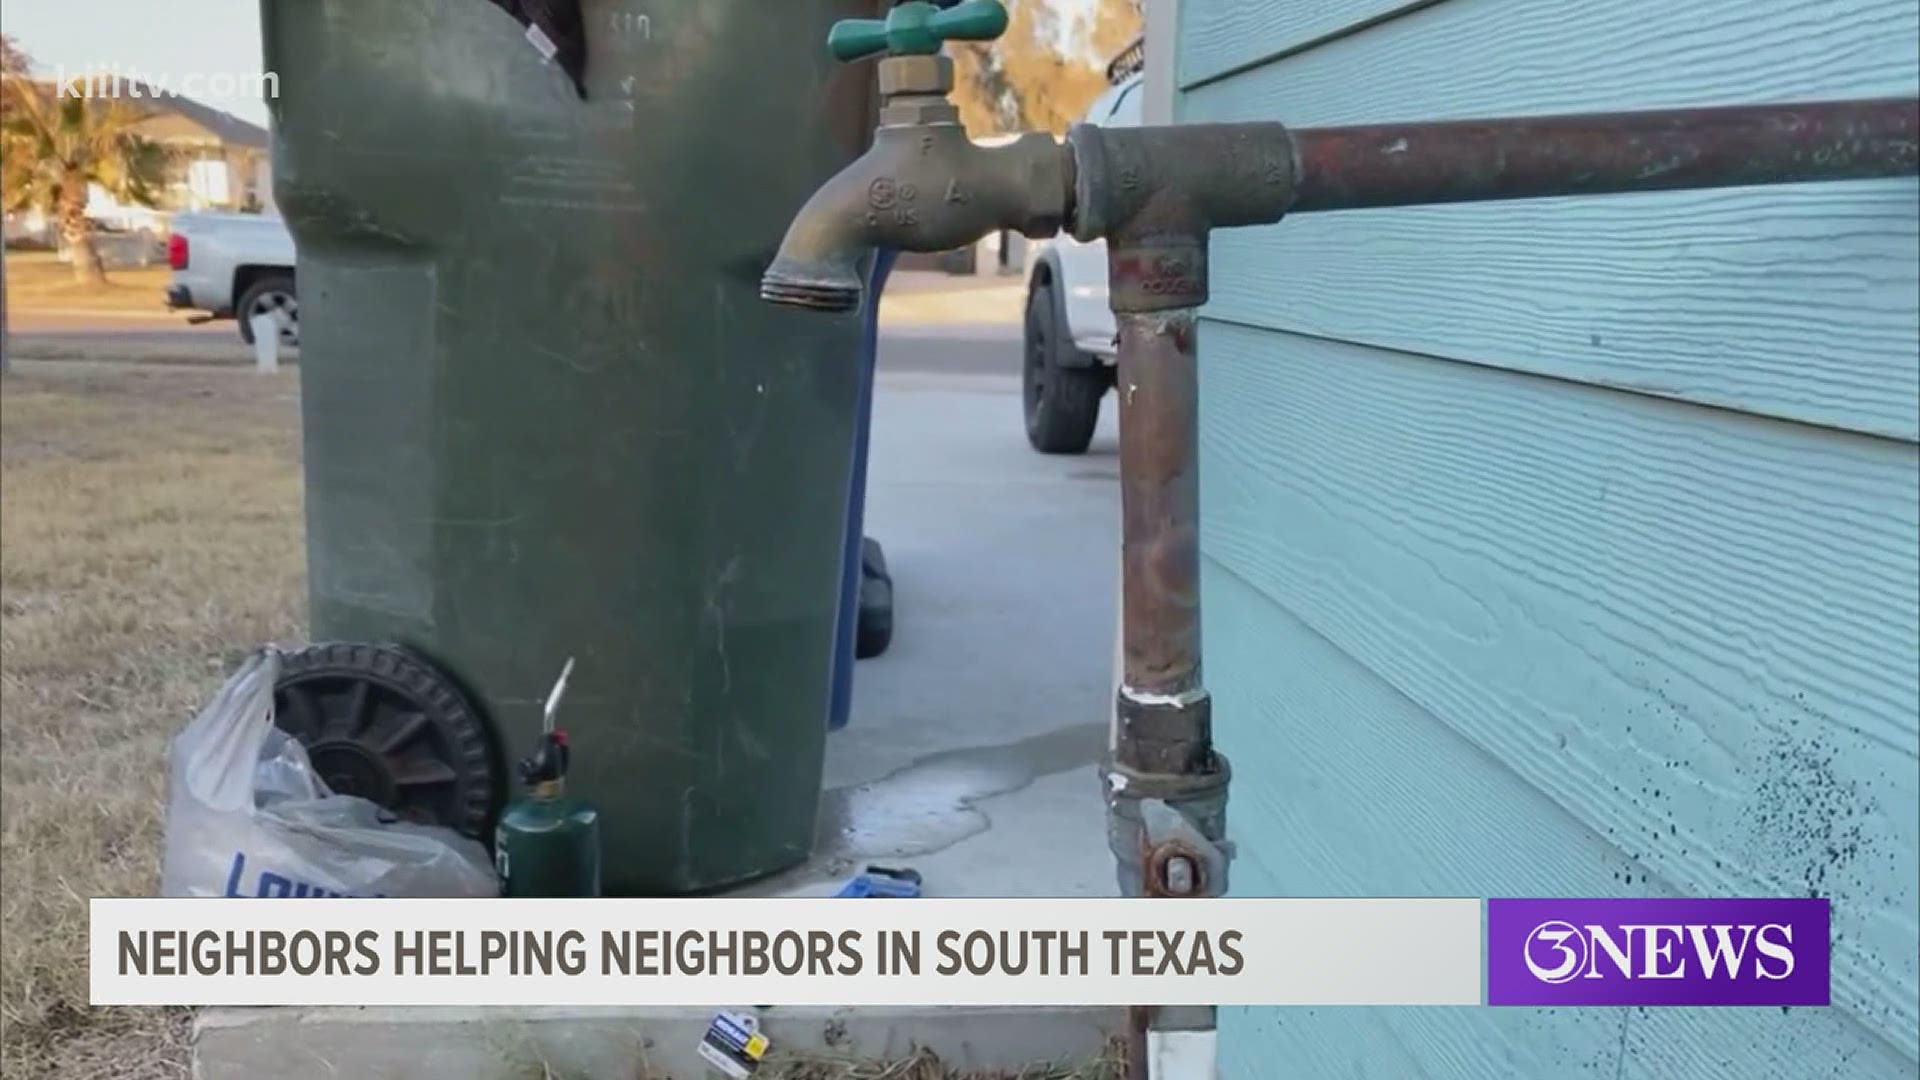 Chul McGuire is continuing his efforts in helping to restore the community one water pipe at a time.